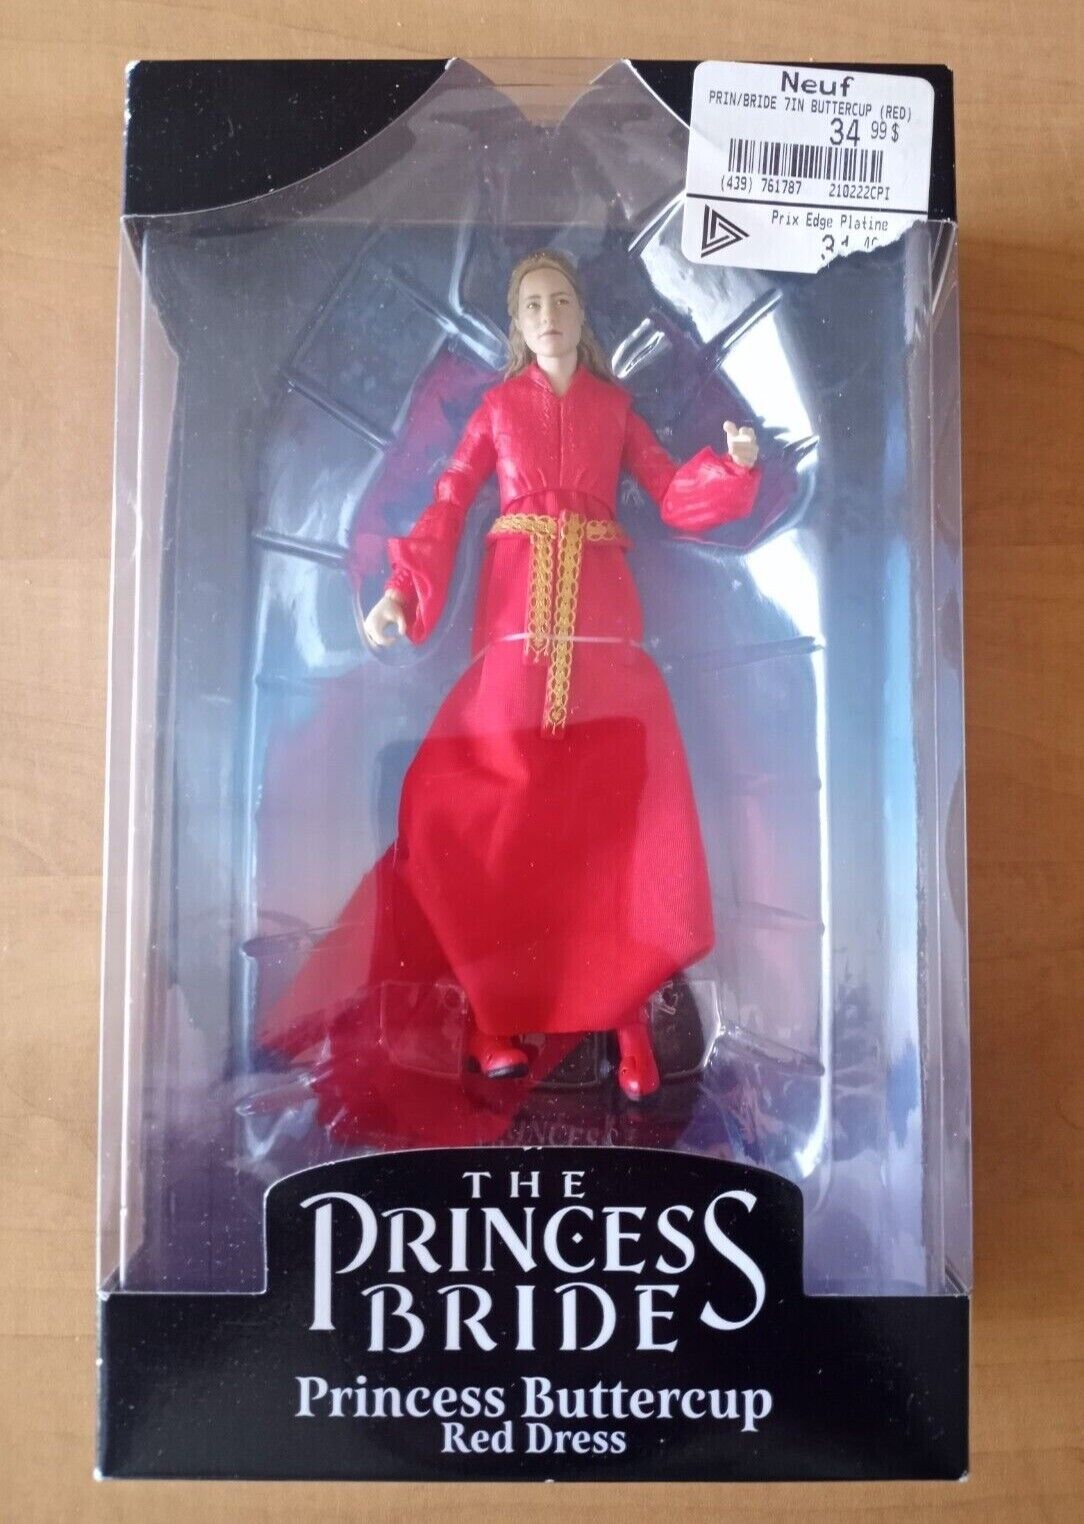 THE PRINCESS BRIDE - 7 INCH ACTION FIGURE WAVE 1 - PRINCESS BUTTERCUP RED DRESS